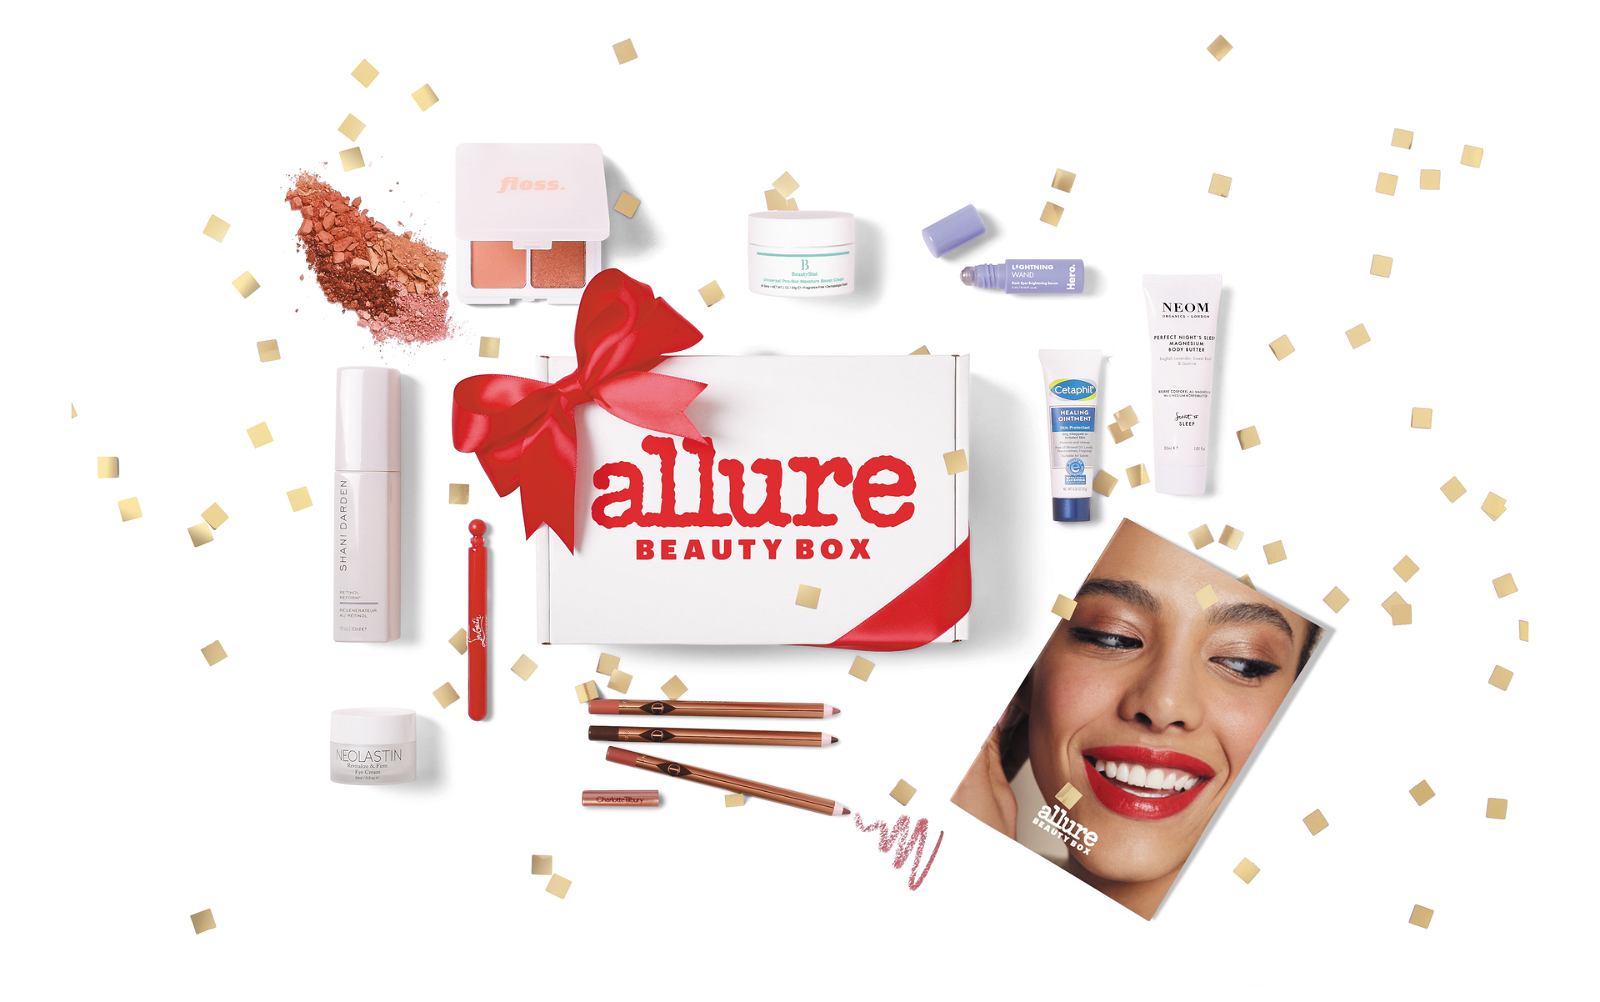 All the items that come in the December Allure Beauty Box laid out against a white background with gold confetti